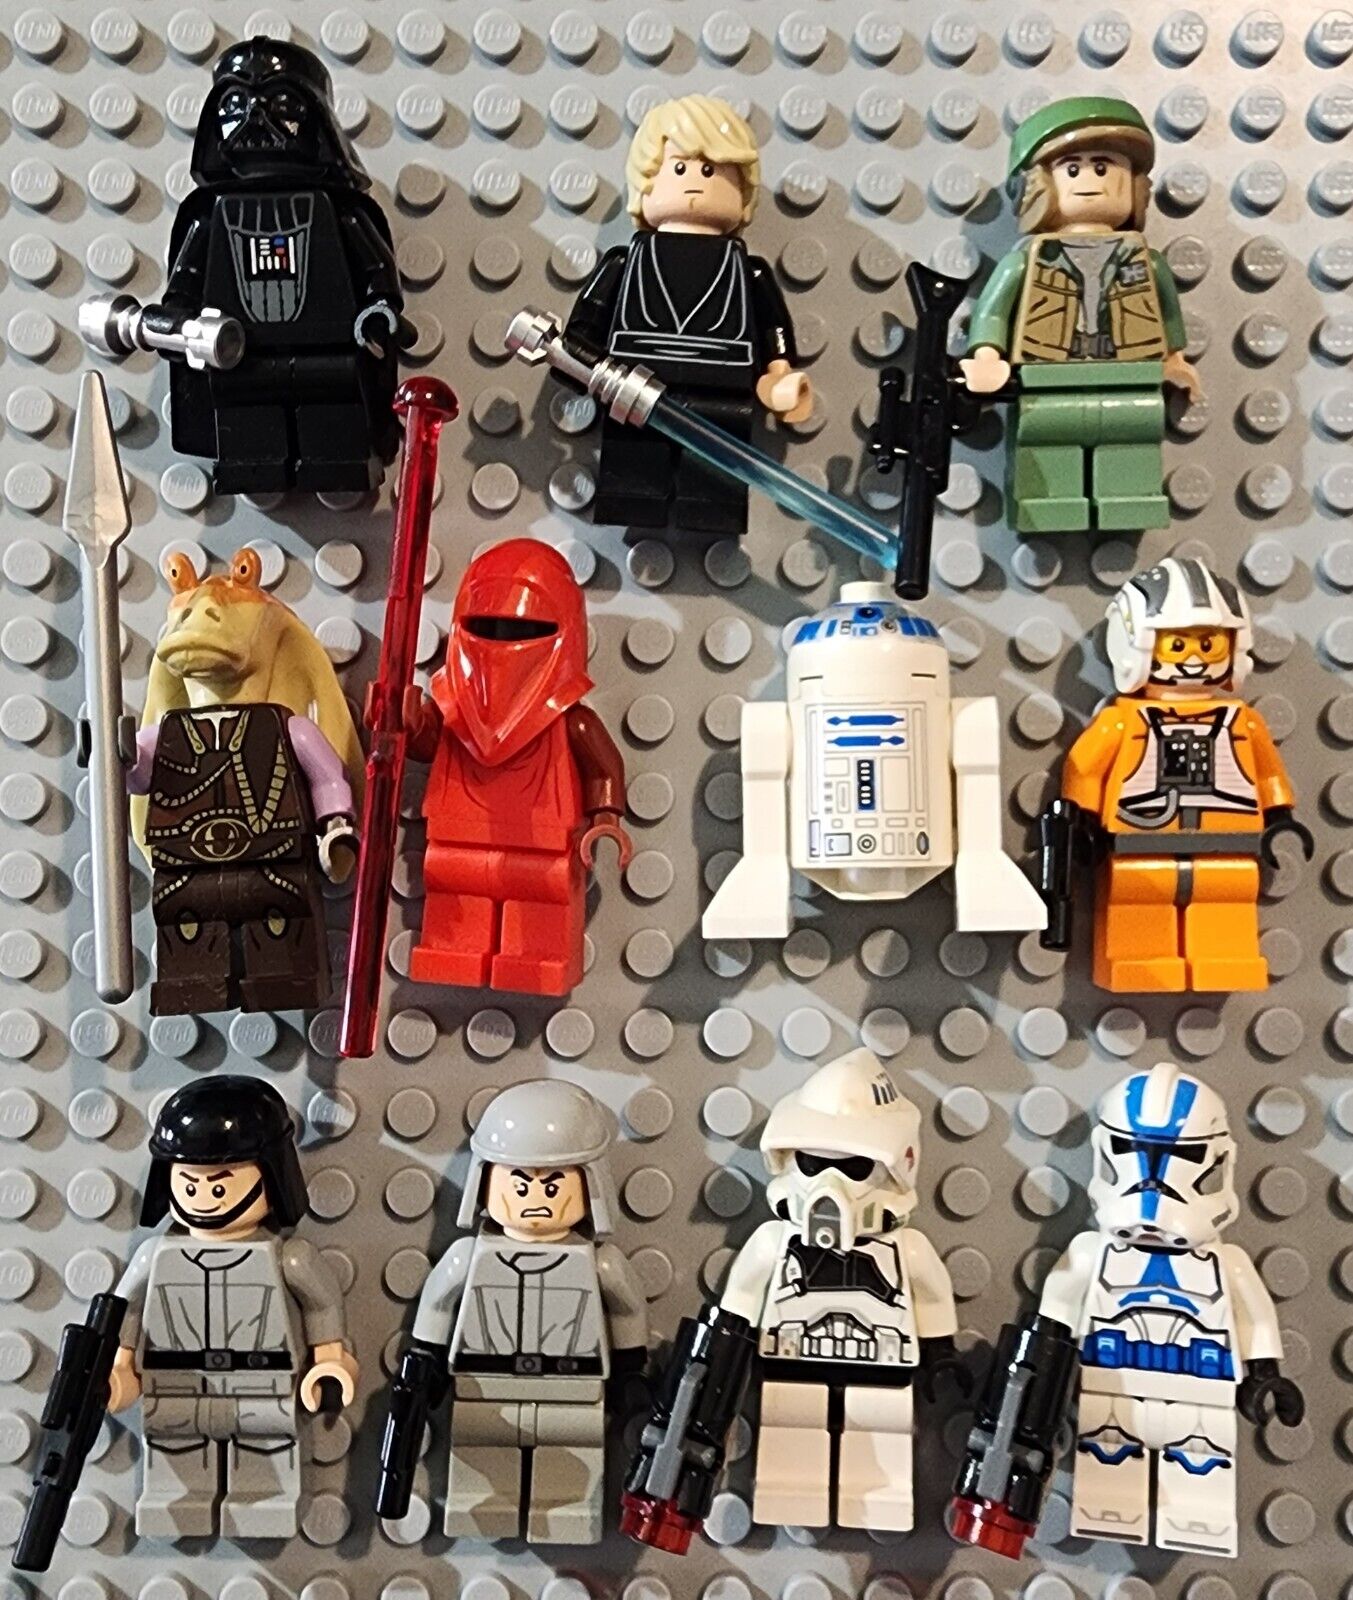 Lego Star Wars Minifigures Lot and Accessories